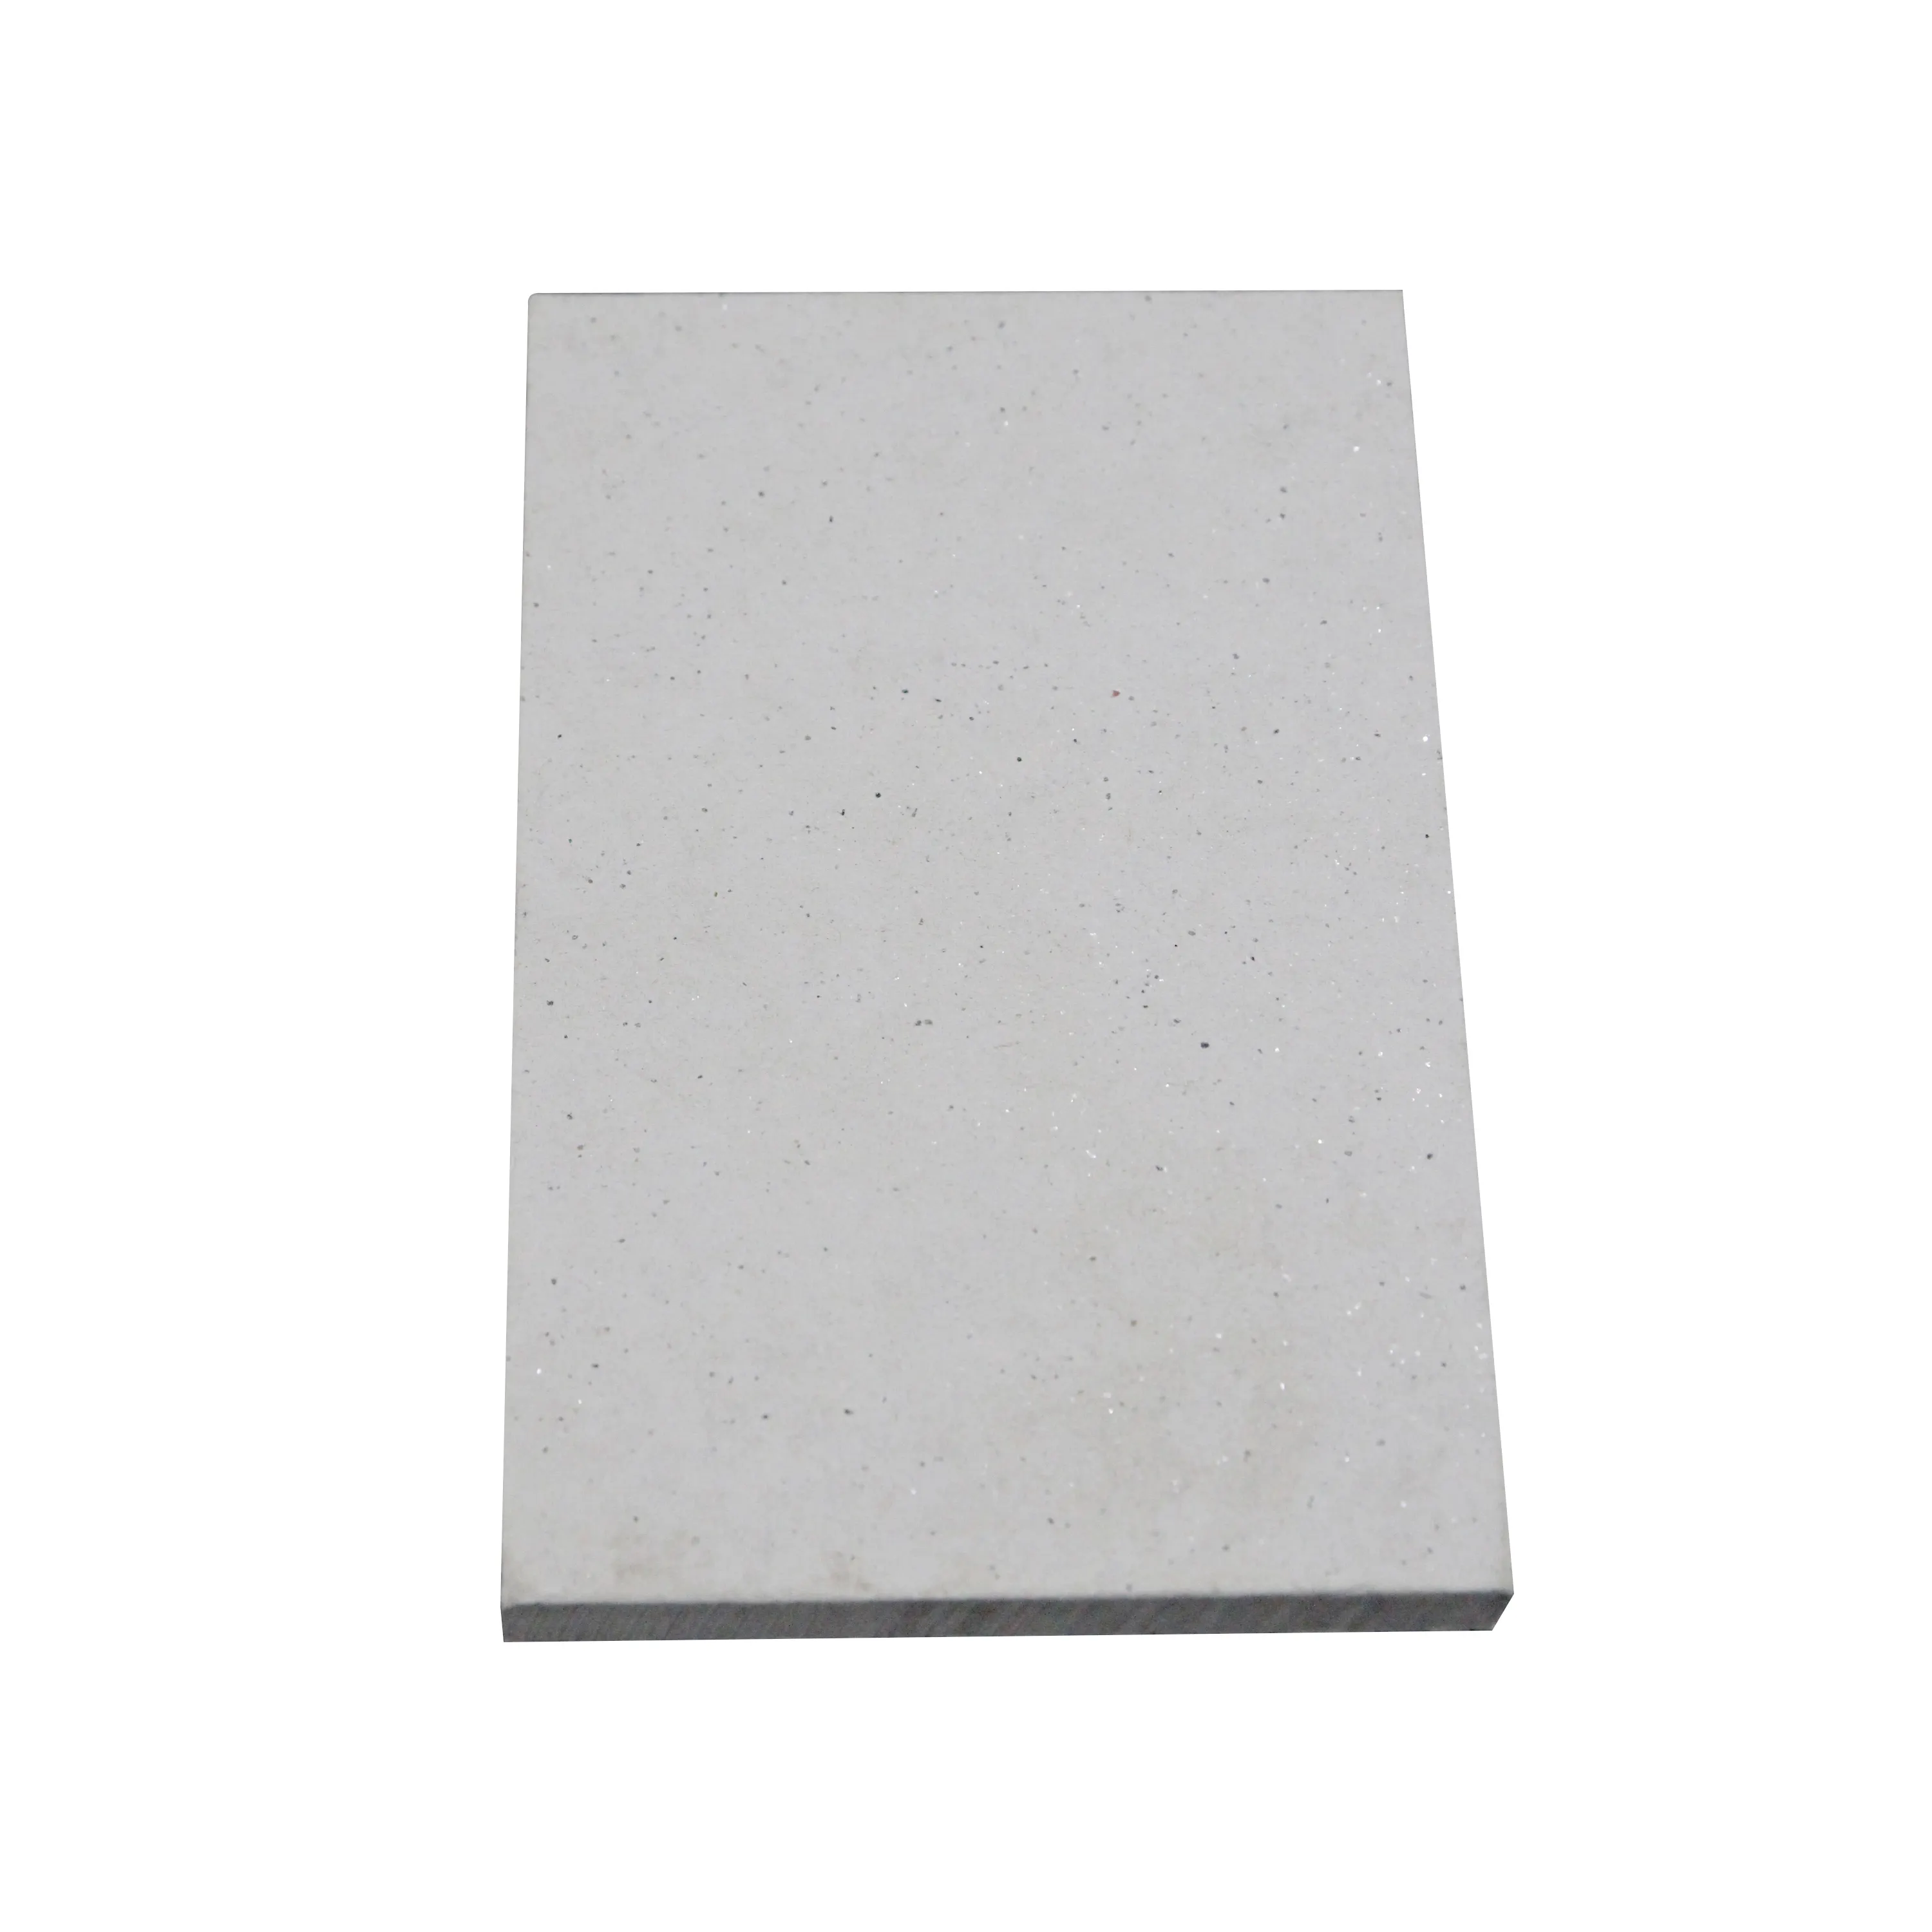 Professional Fire Rated Material Calcium Silicate Board High Temperature Resistance